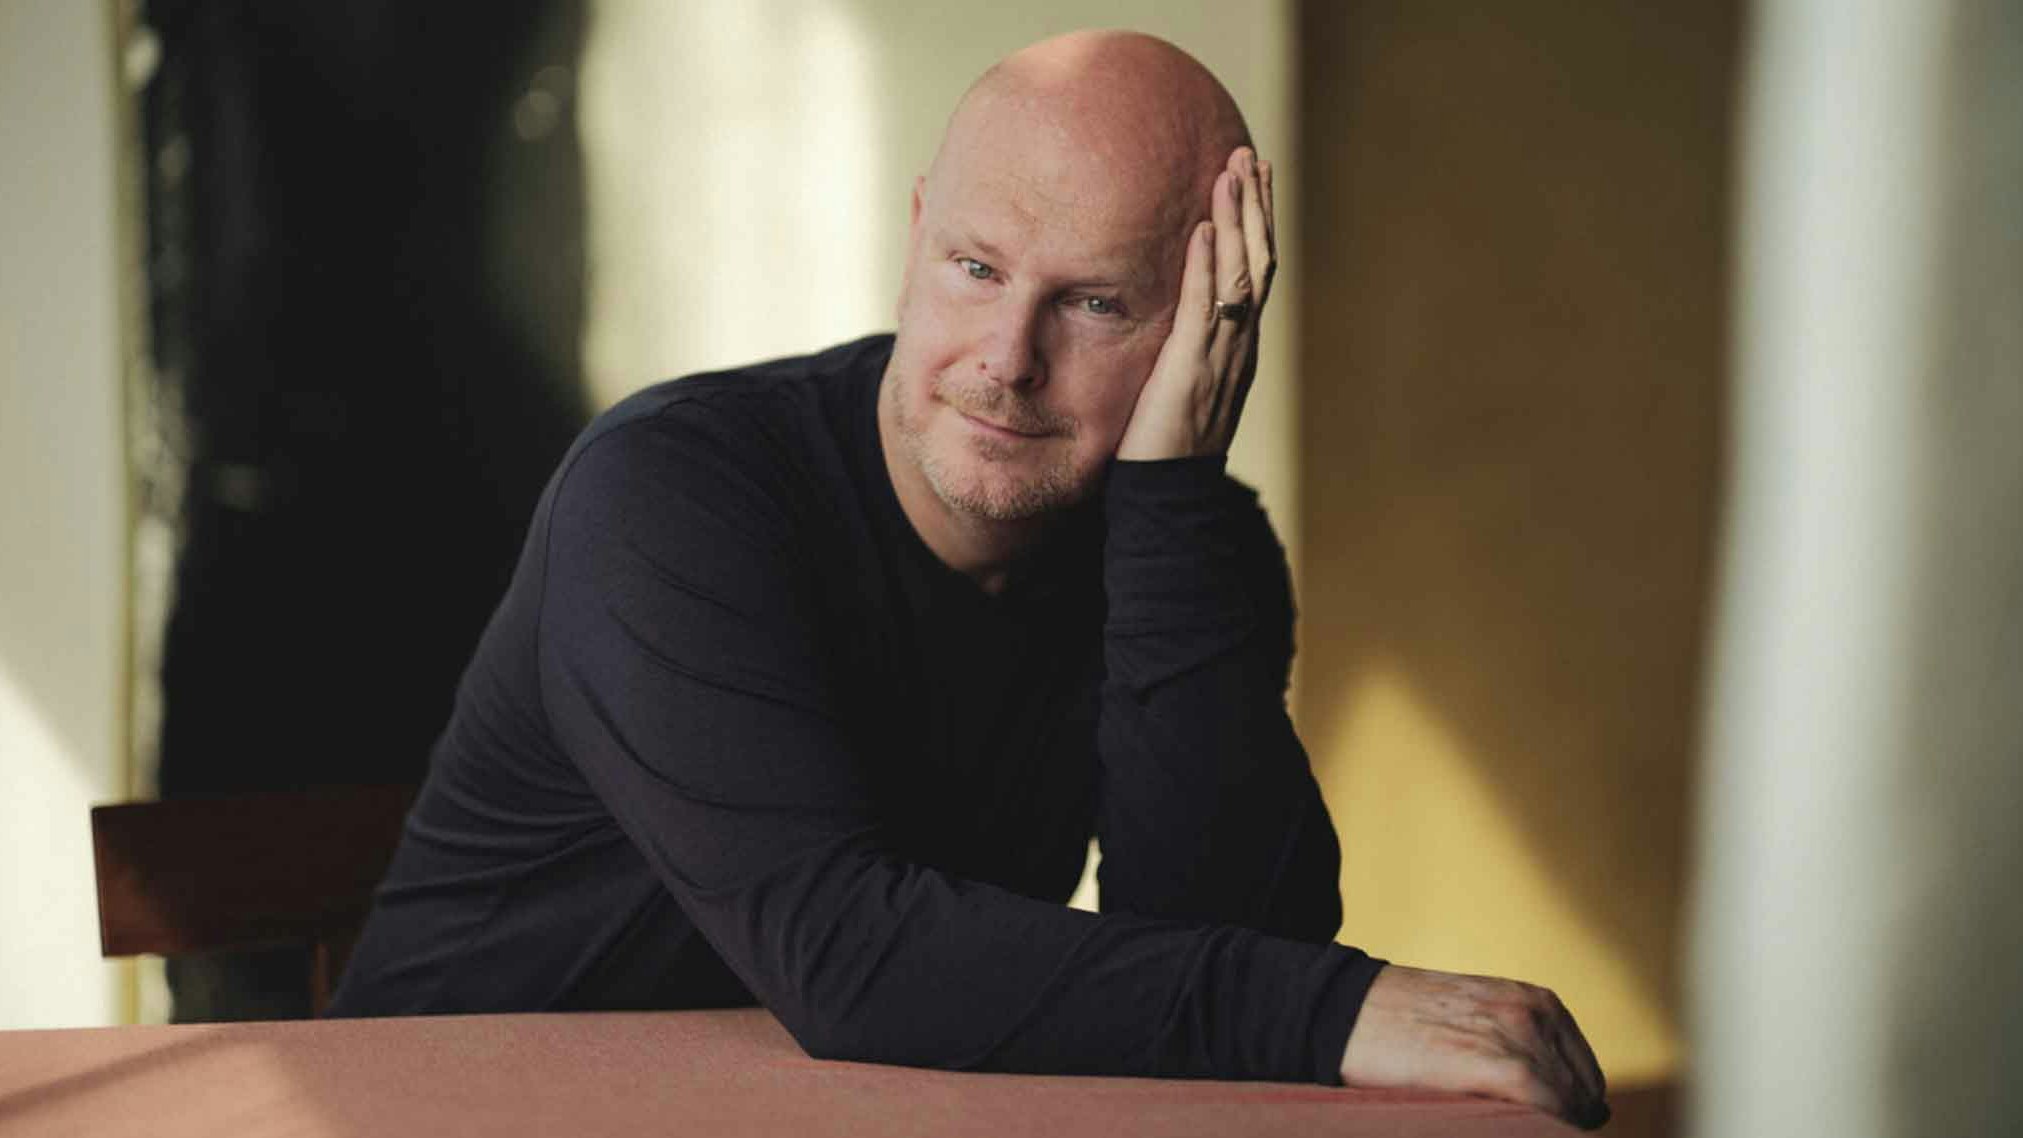 Philip Selway – Moved to Band on the Wall